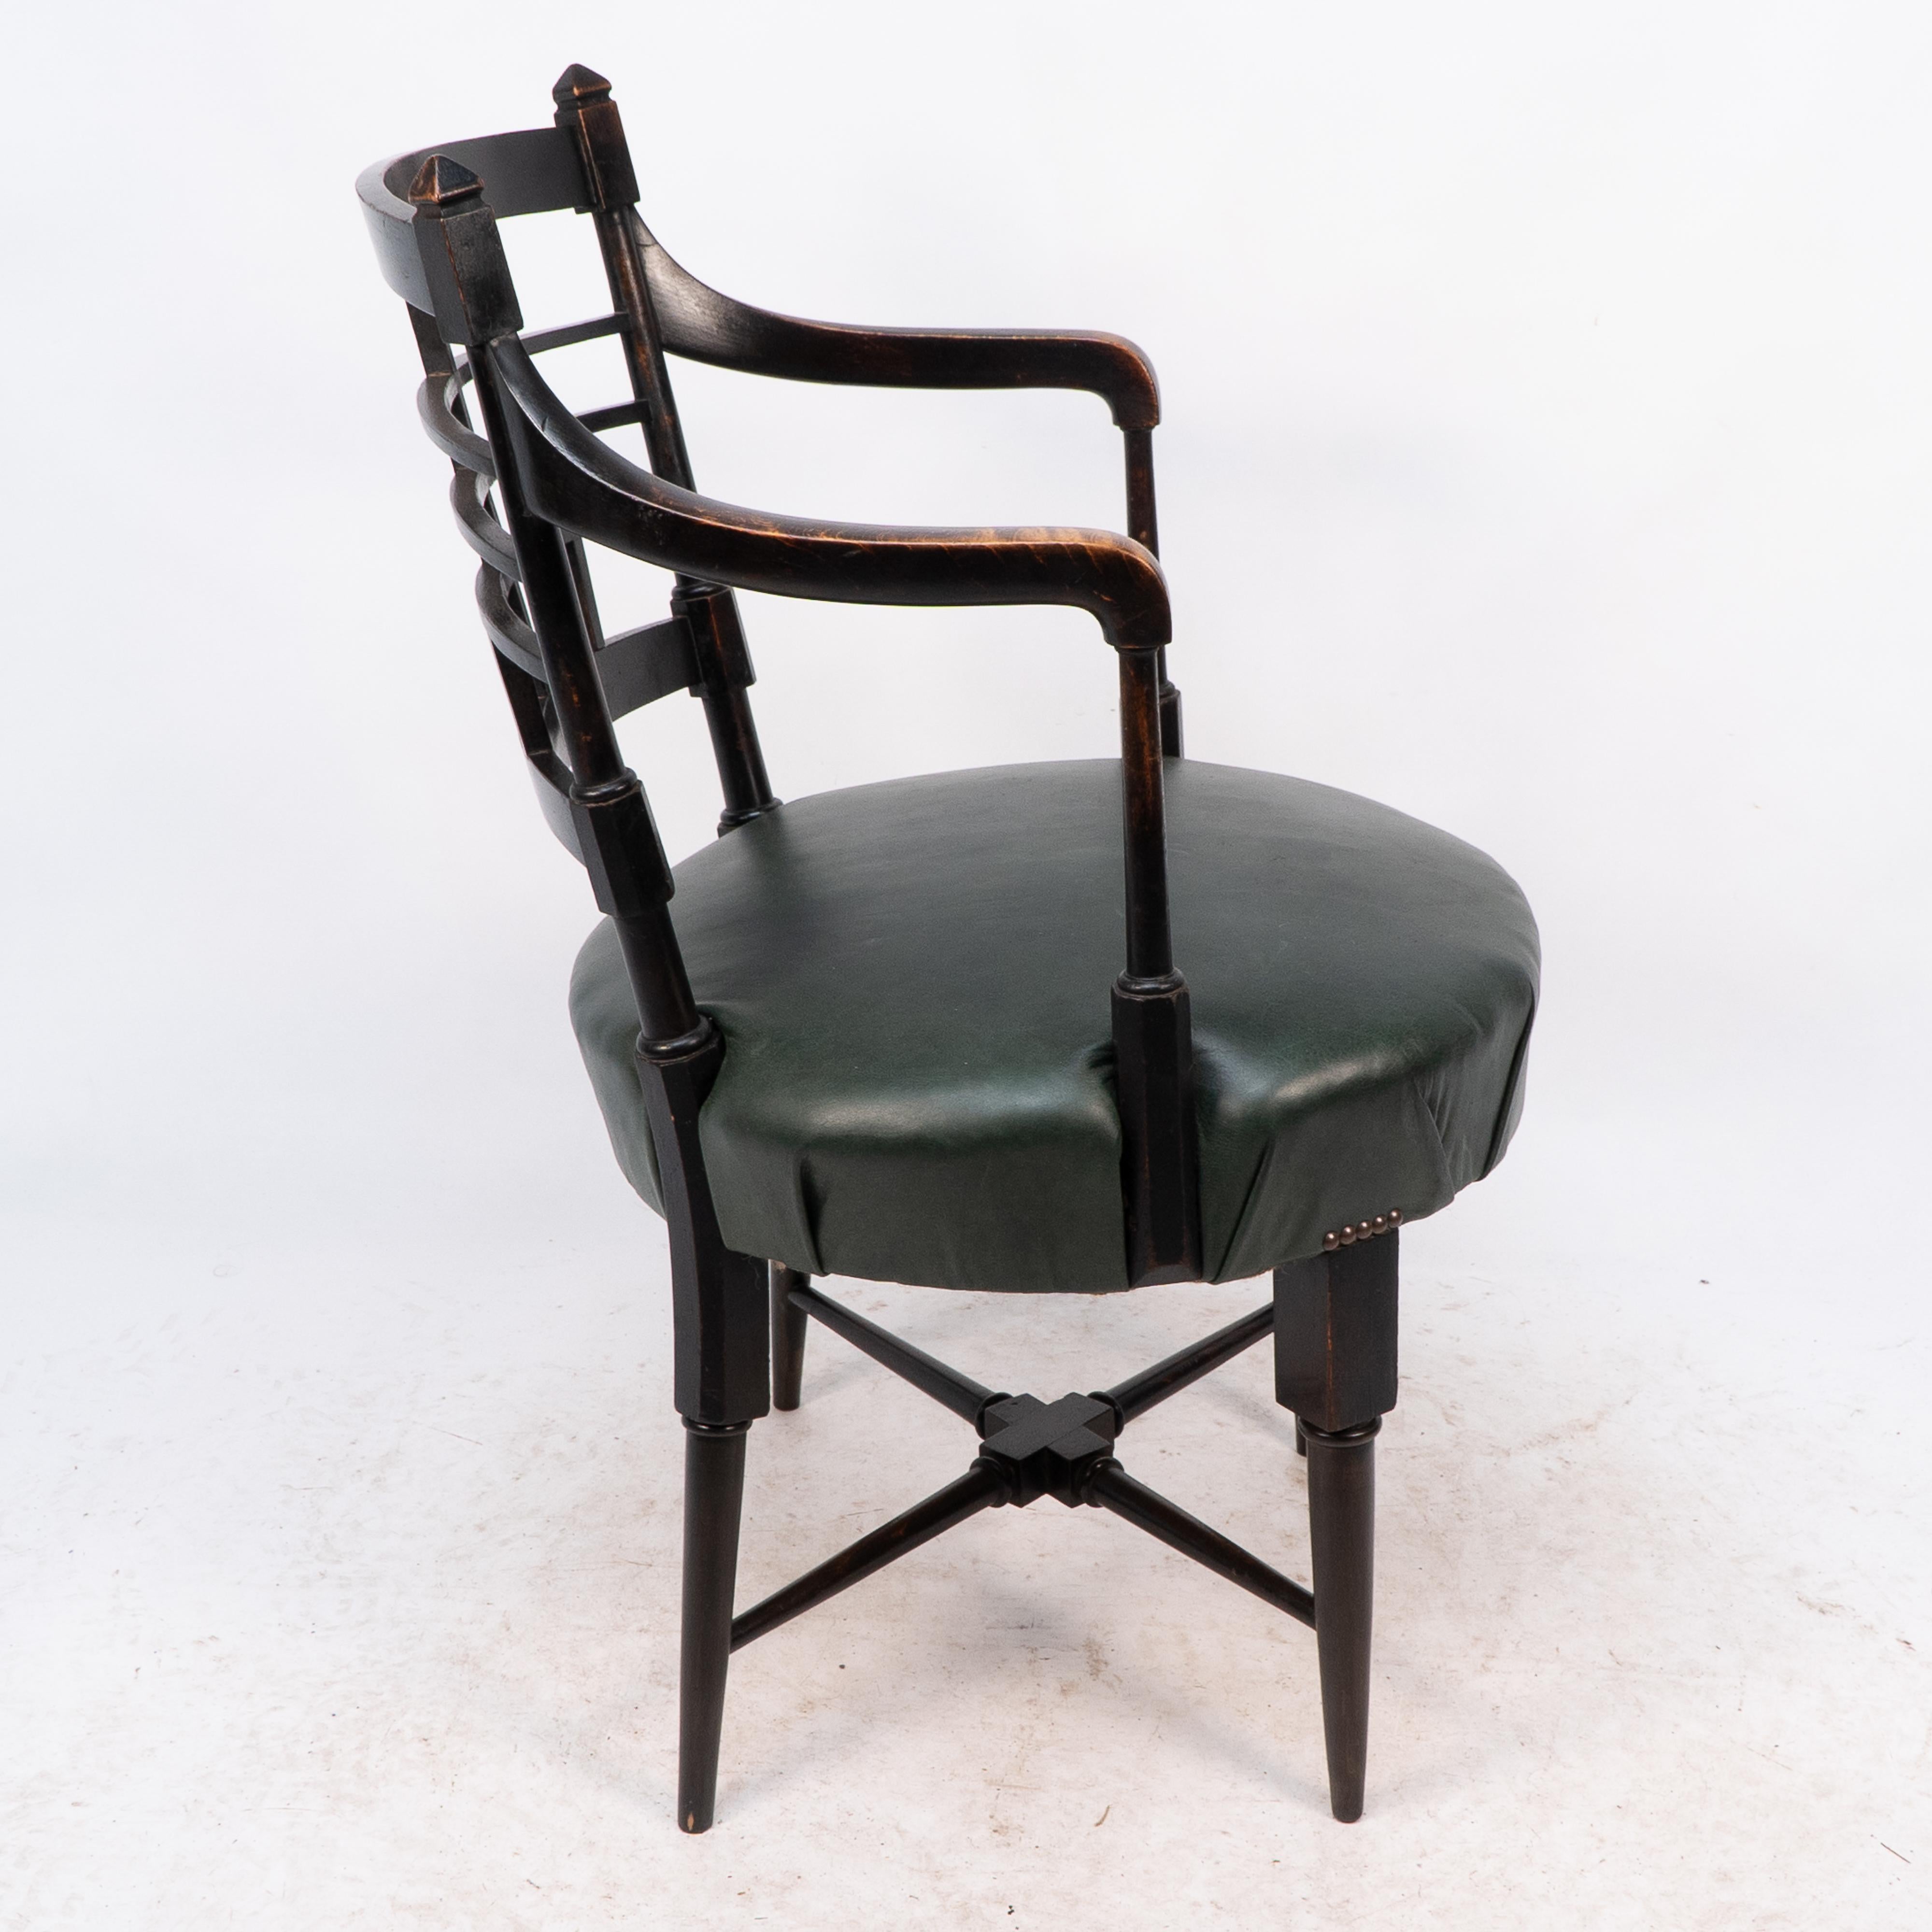 Late 19th Century E W Godwin for William Watt. An Anglo-Japanese Old English or Jacobean armchair For Sale